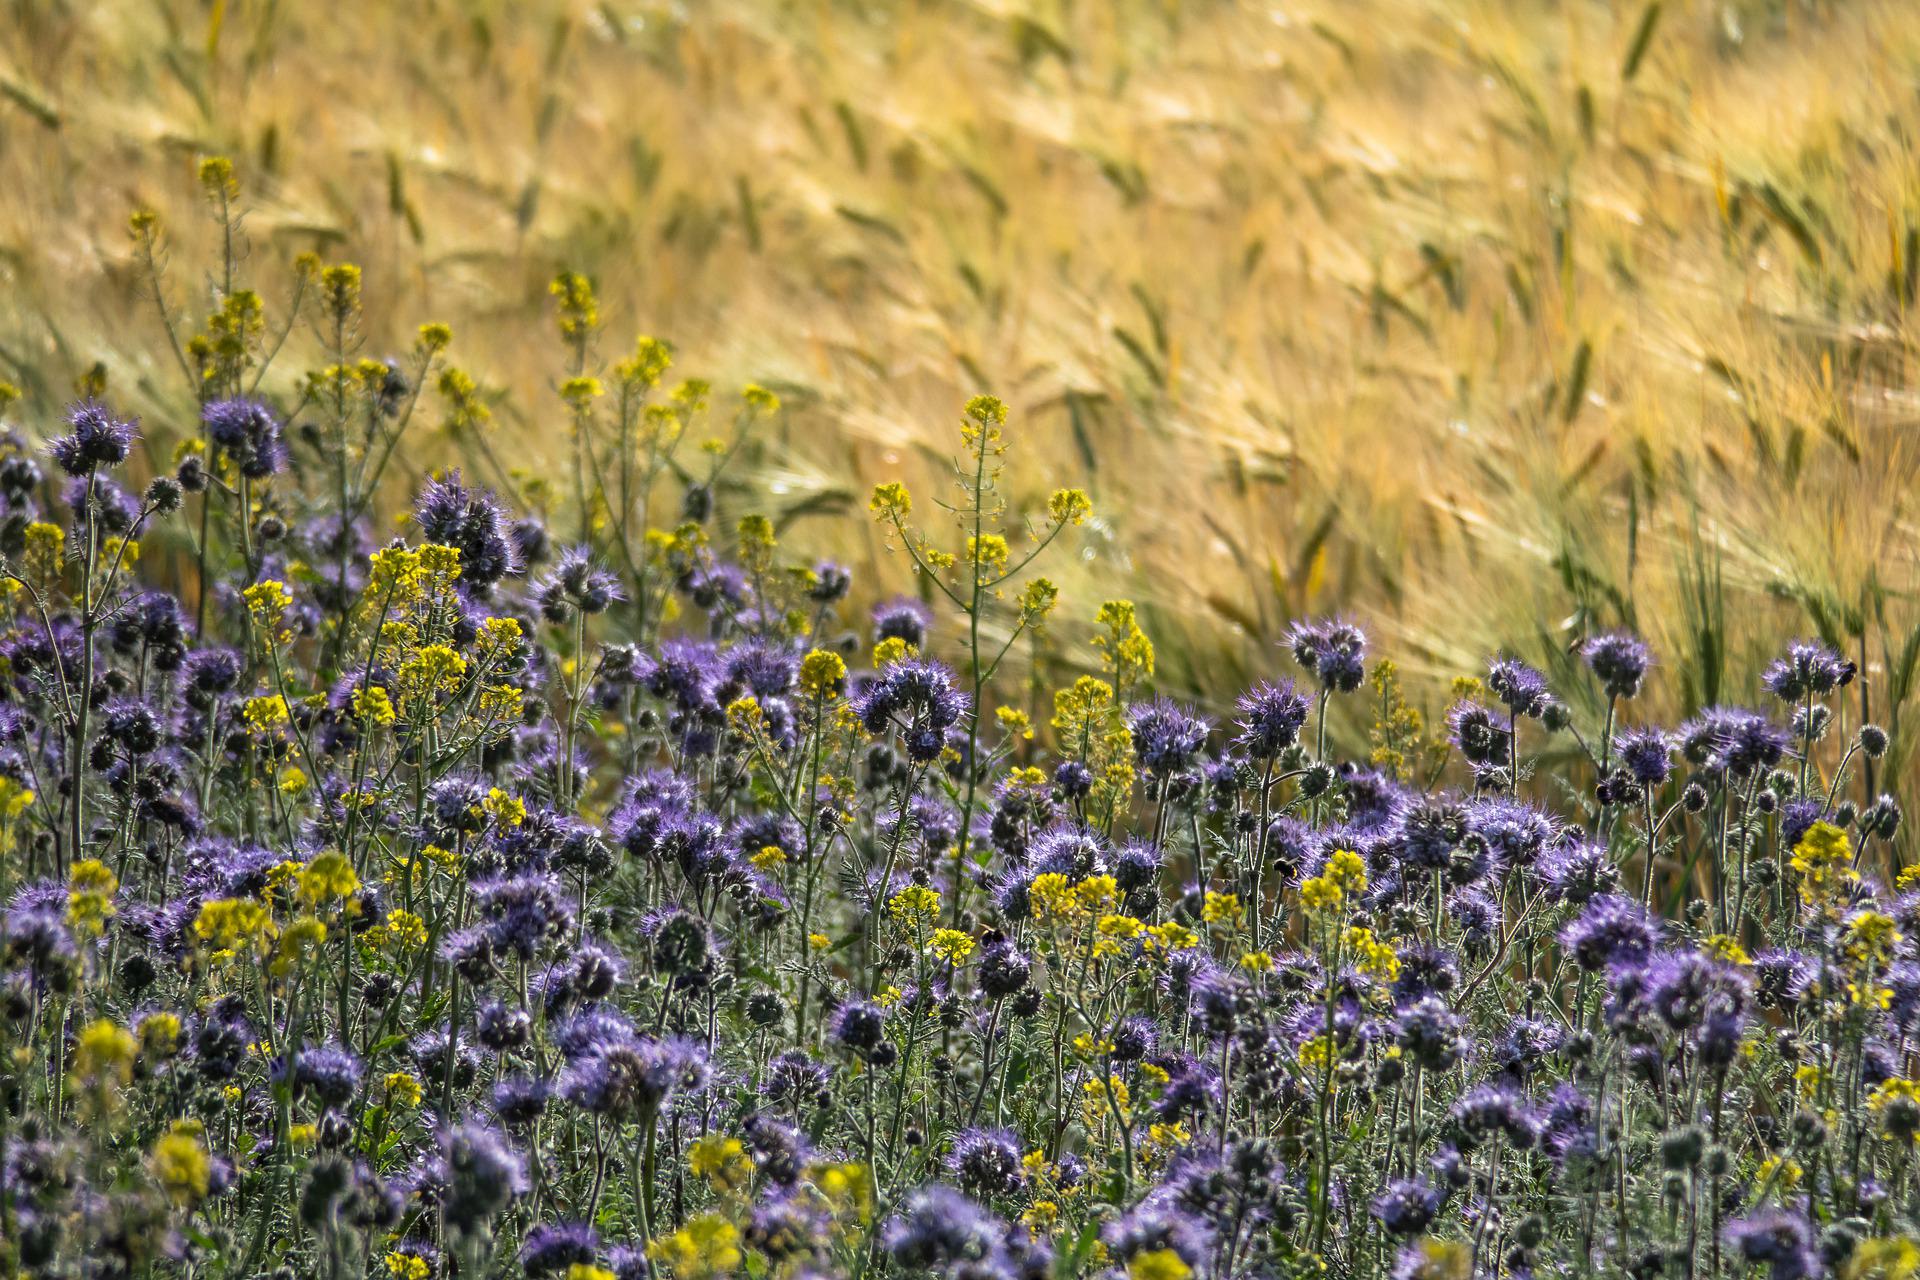 Photograph of a densely planted field with yellow and violet flowers. Wheat can be seen in the background.